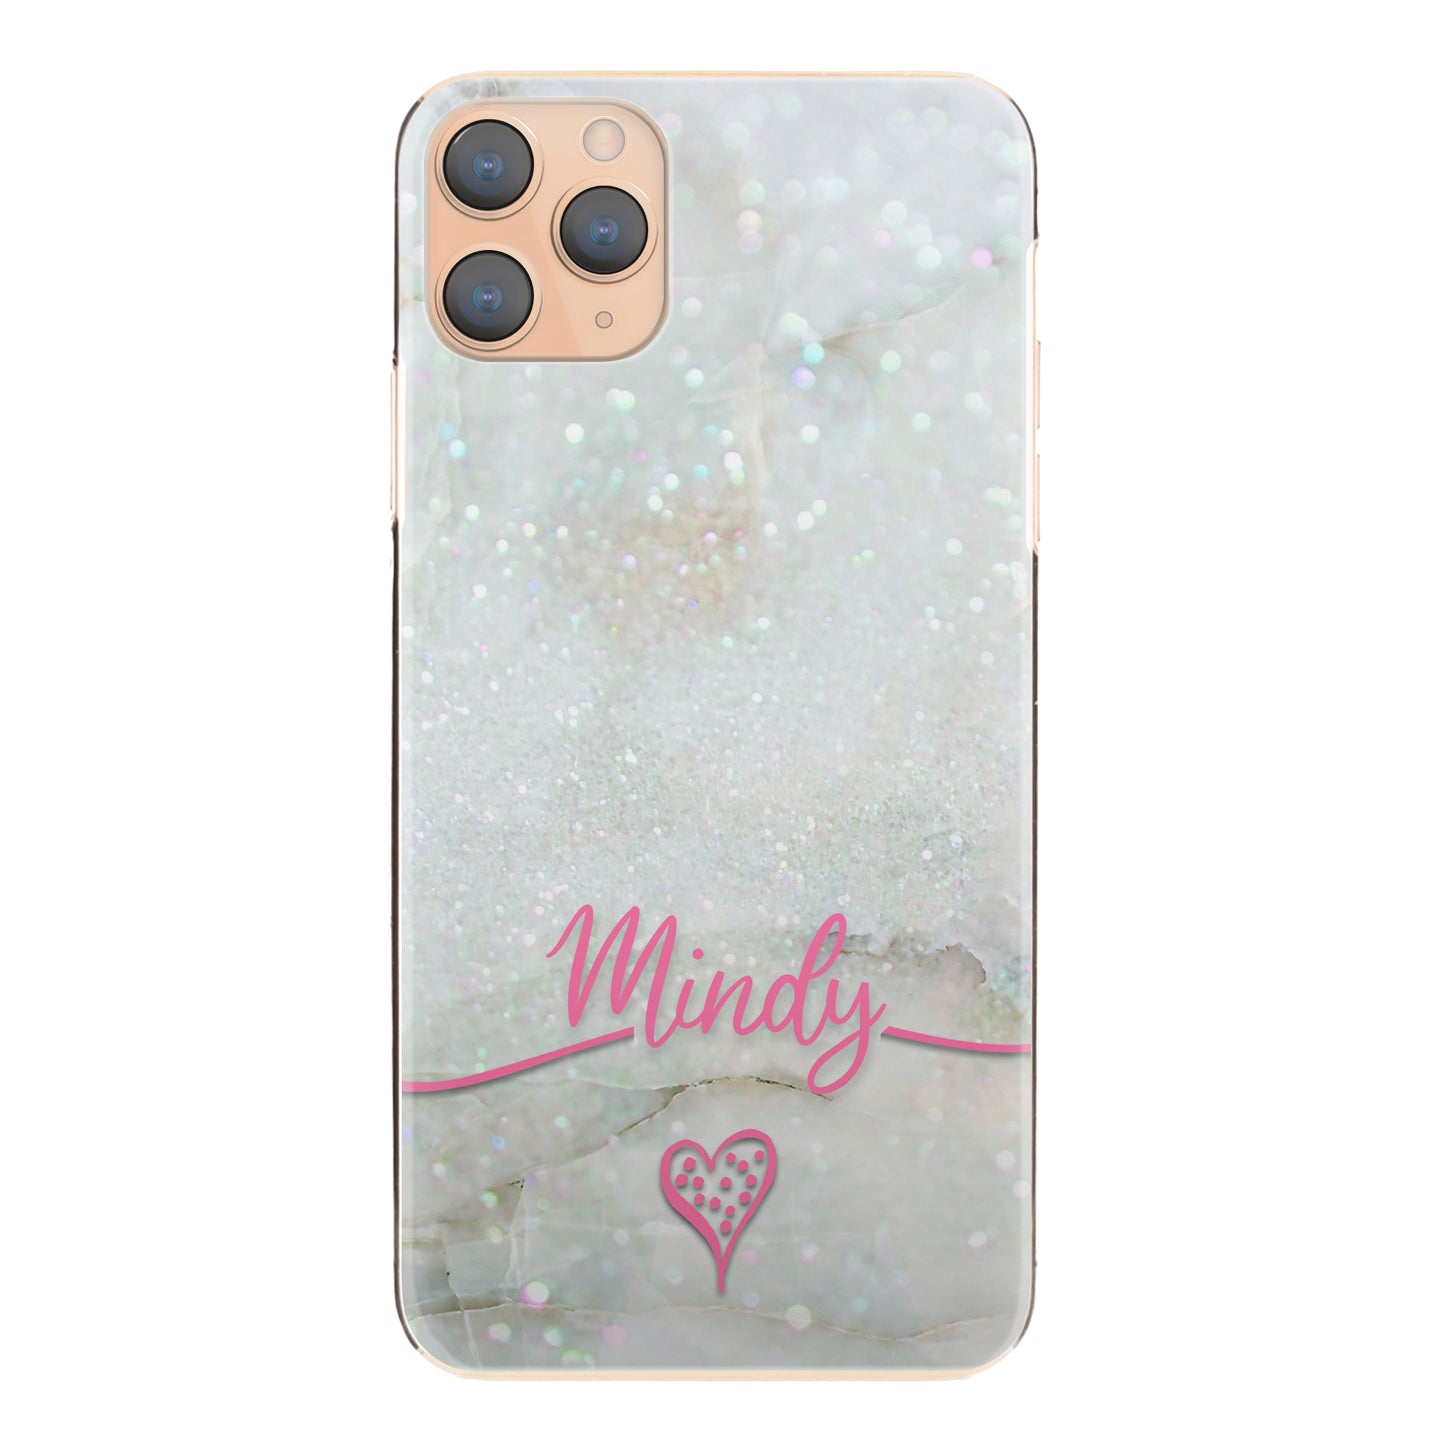 Personalised HTC Phone Hard Case with Heart Accented Pink Text on Crystal Marble